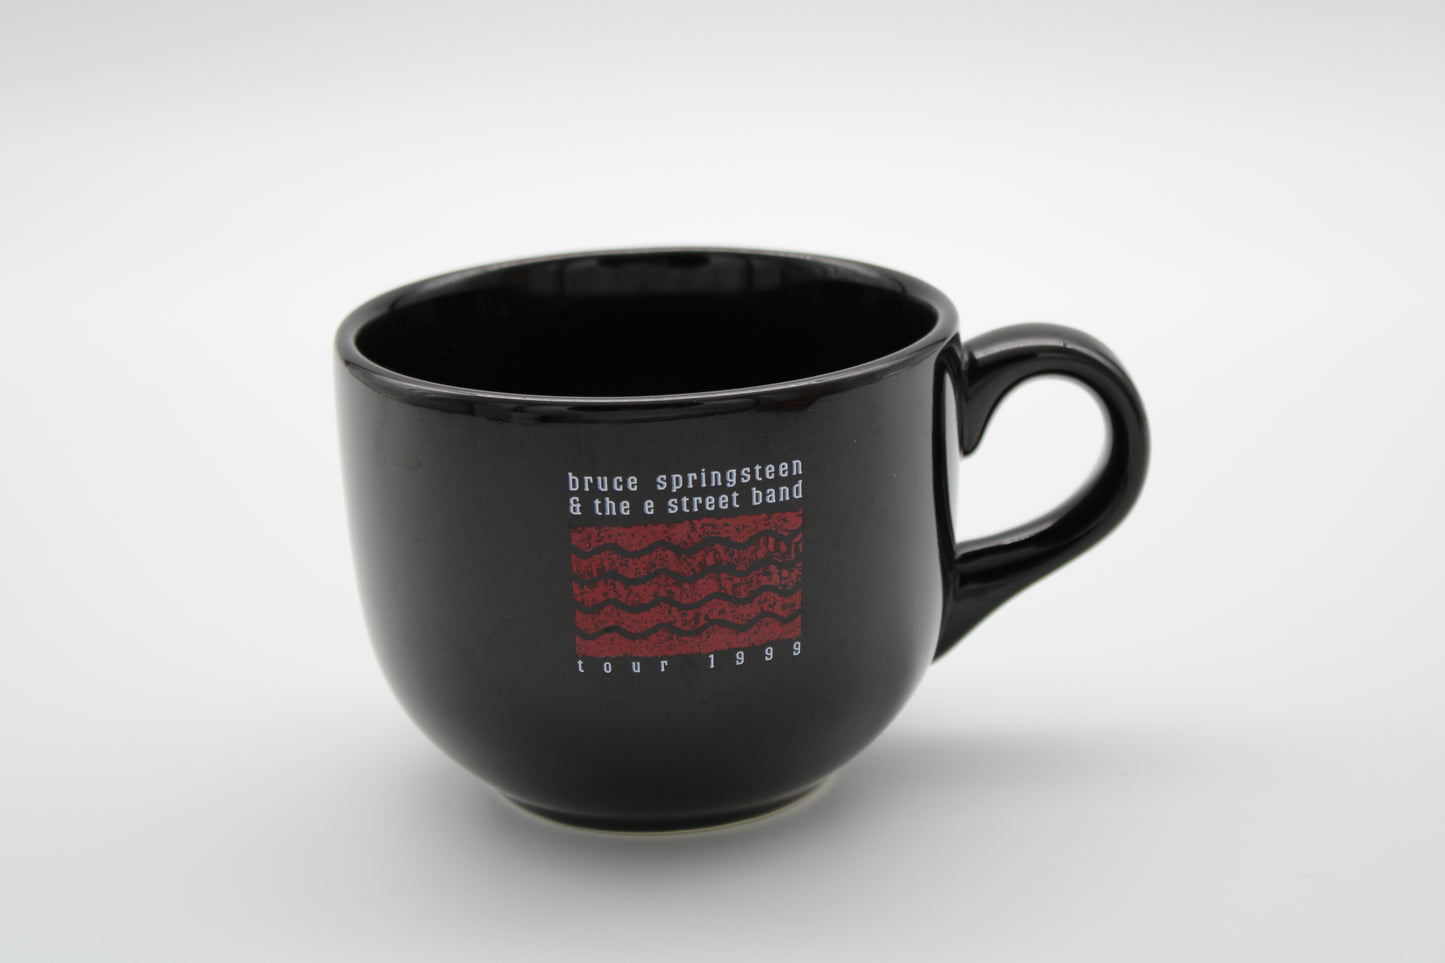 Bruce Springsteen Reunion Tour Coffee Mug - Authentic Thrill Hill 1999